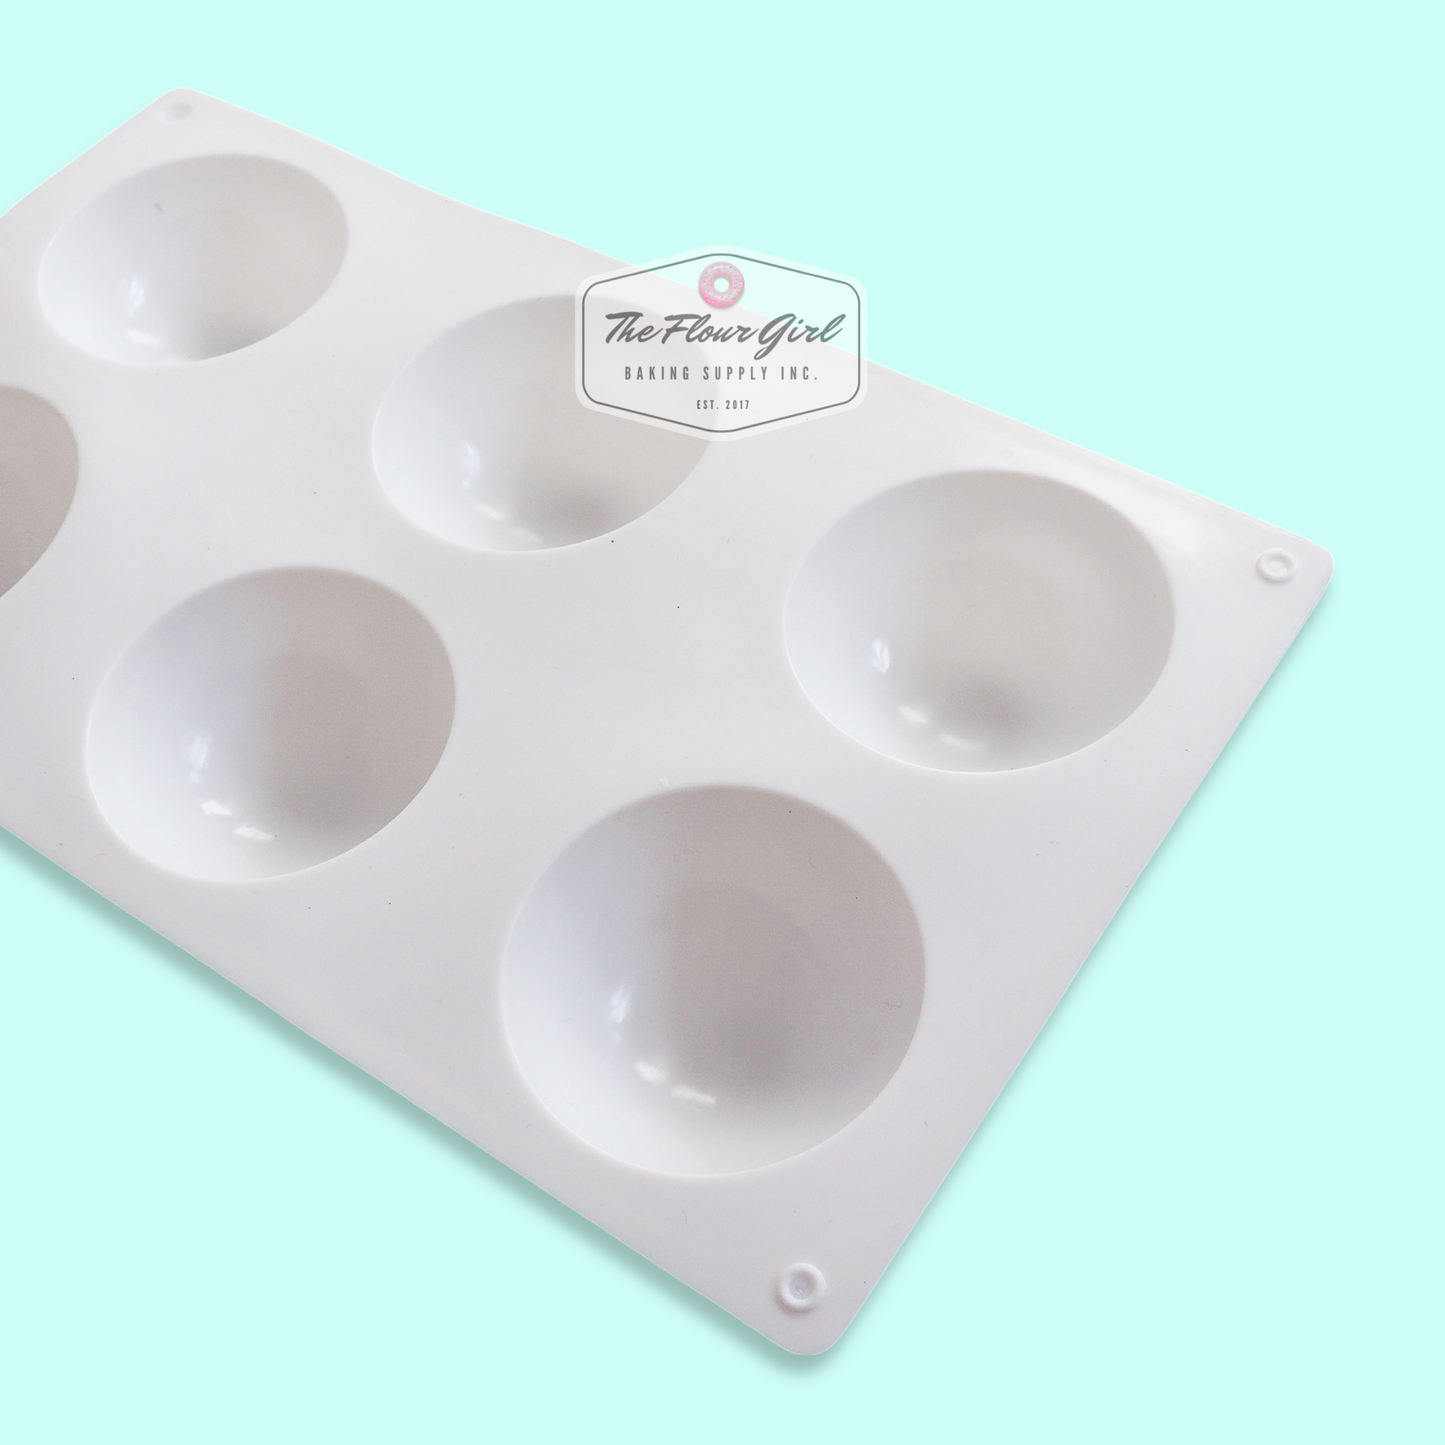 3D 6-Cavity Silicone Sphere Hot Chocolate Bomb Mold